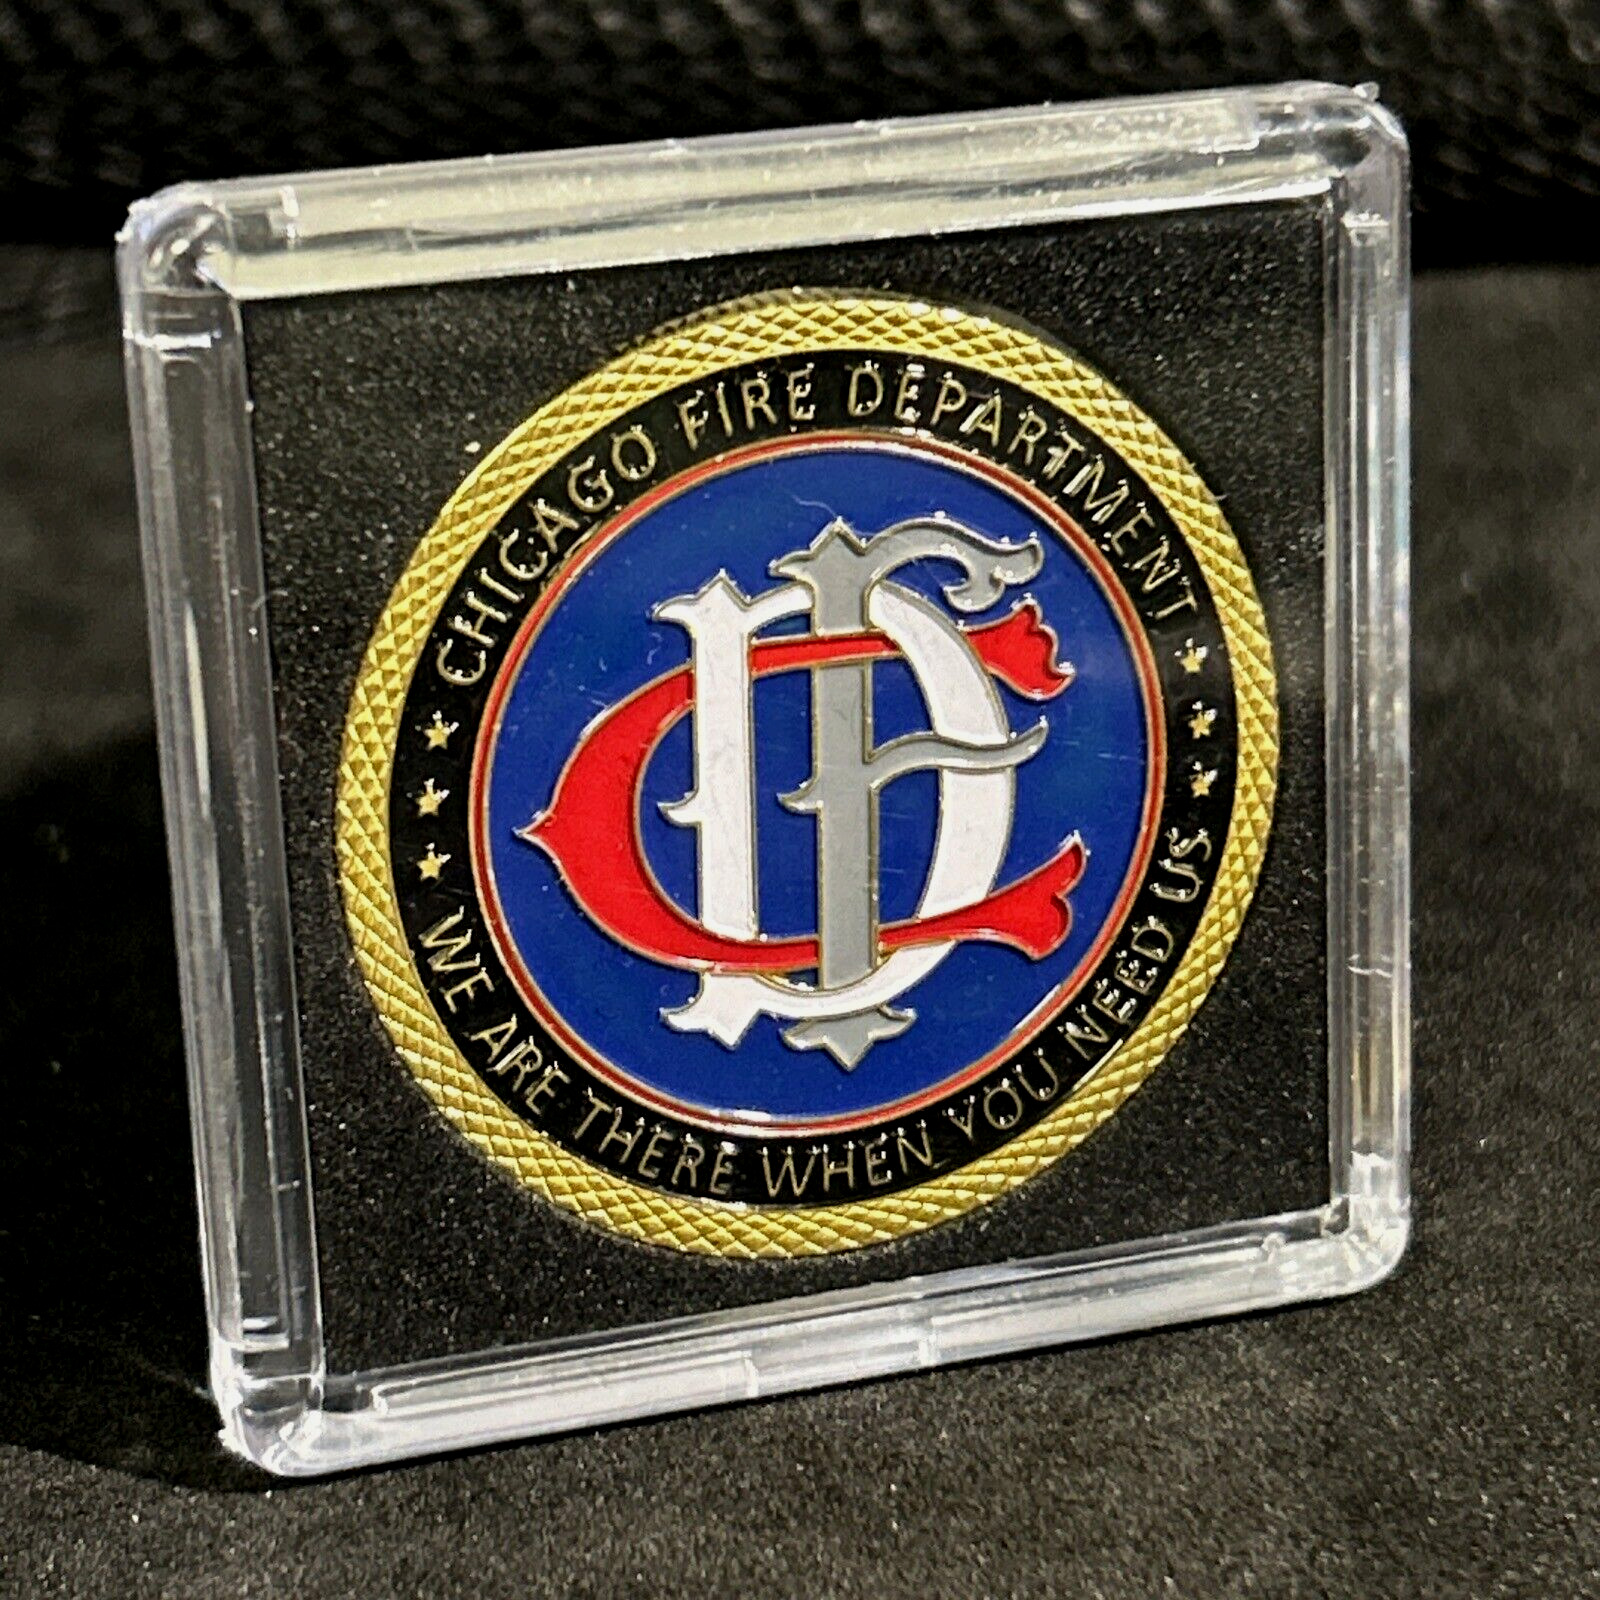 CHICAGO FIRE DEPARTMENT GOLD FINISH Challenge Coin W Case Brand New